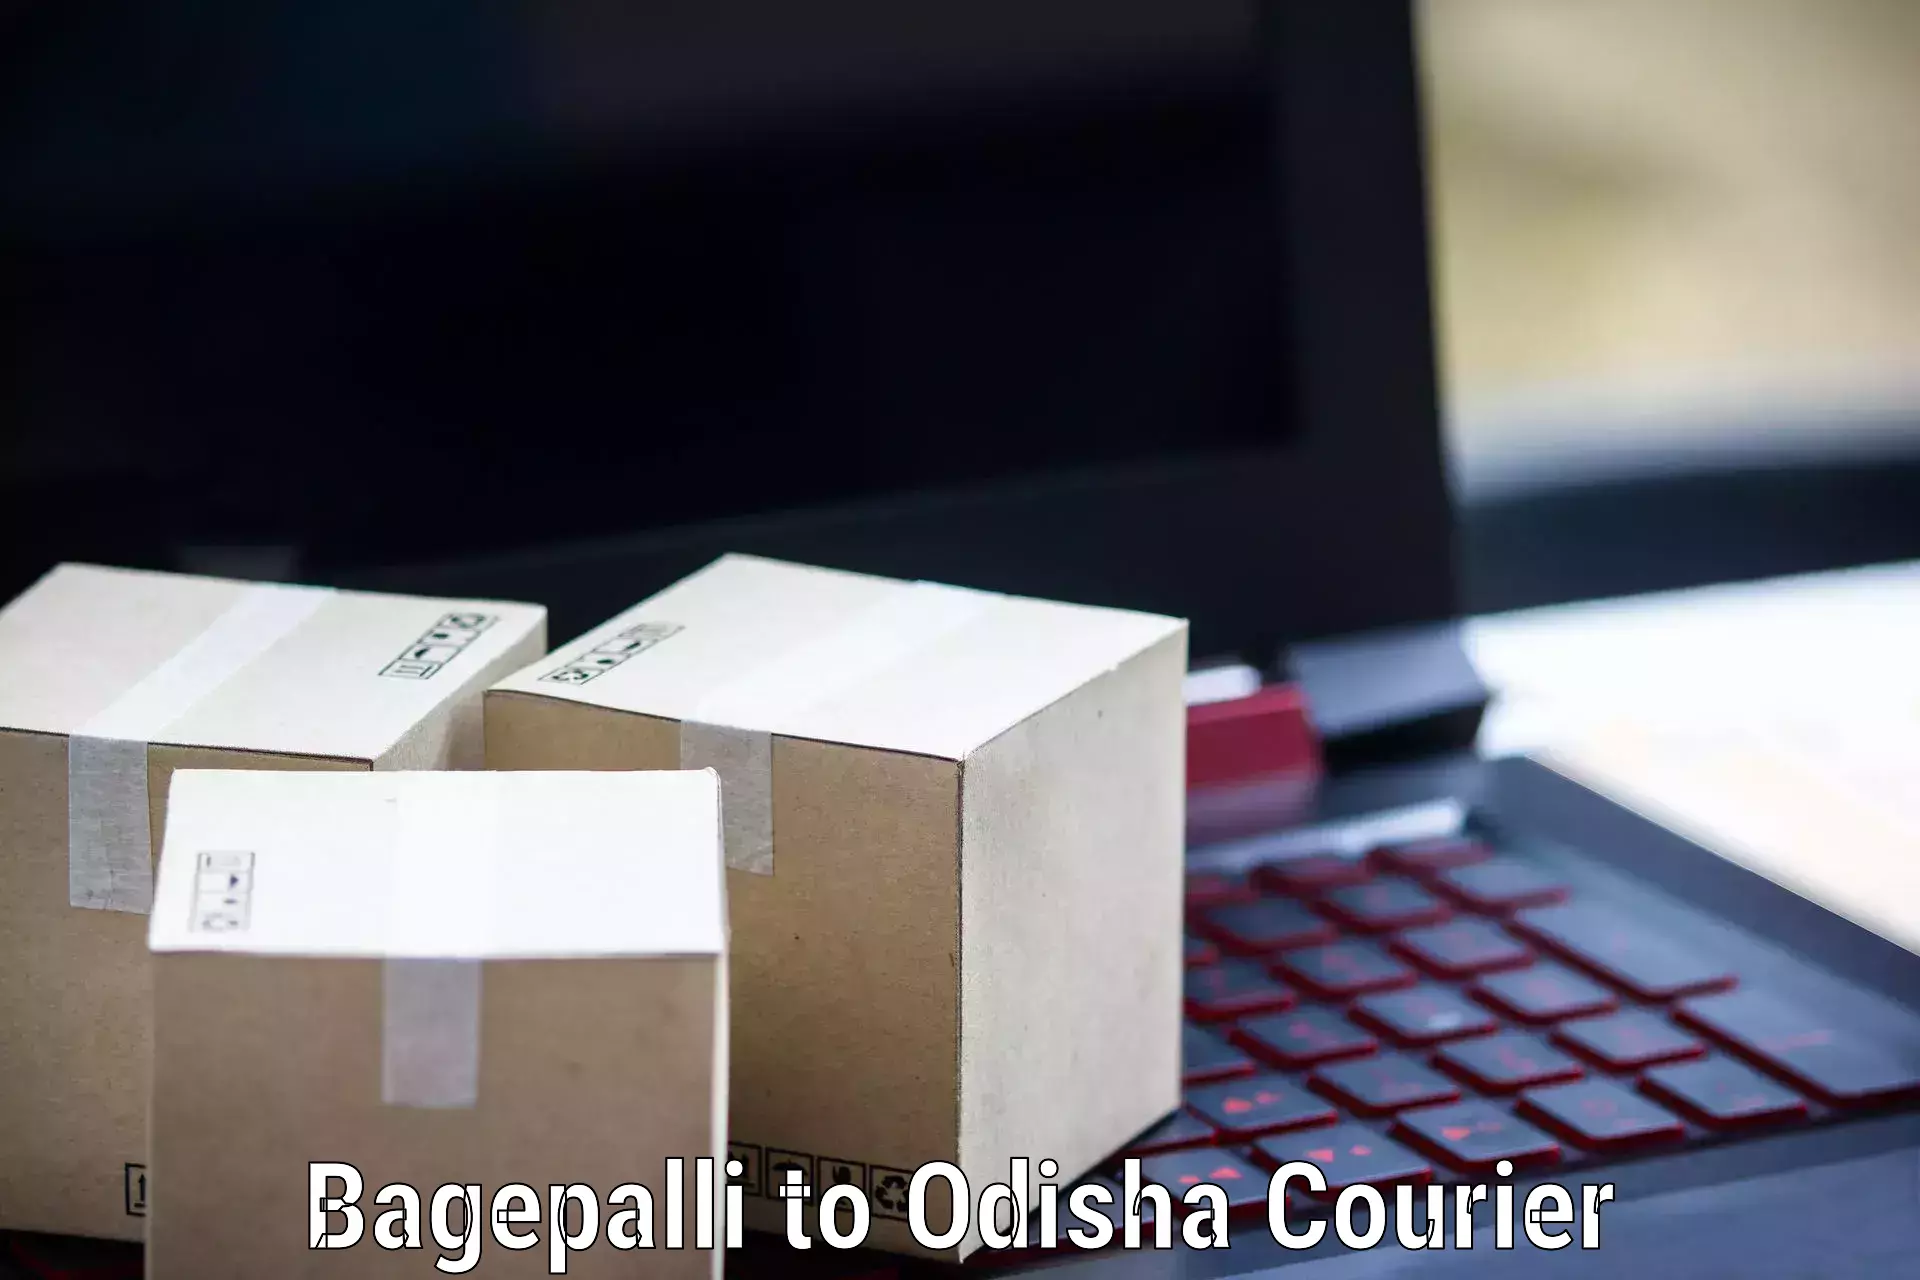 Flexible delivery scheduling Bagepalli to Sohela